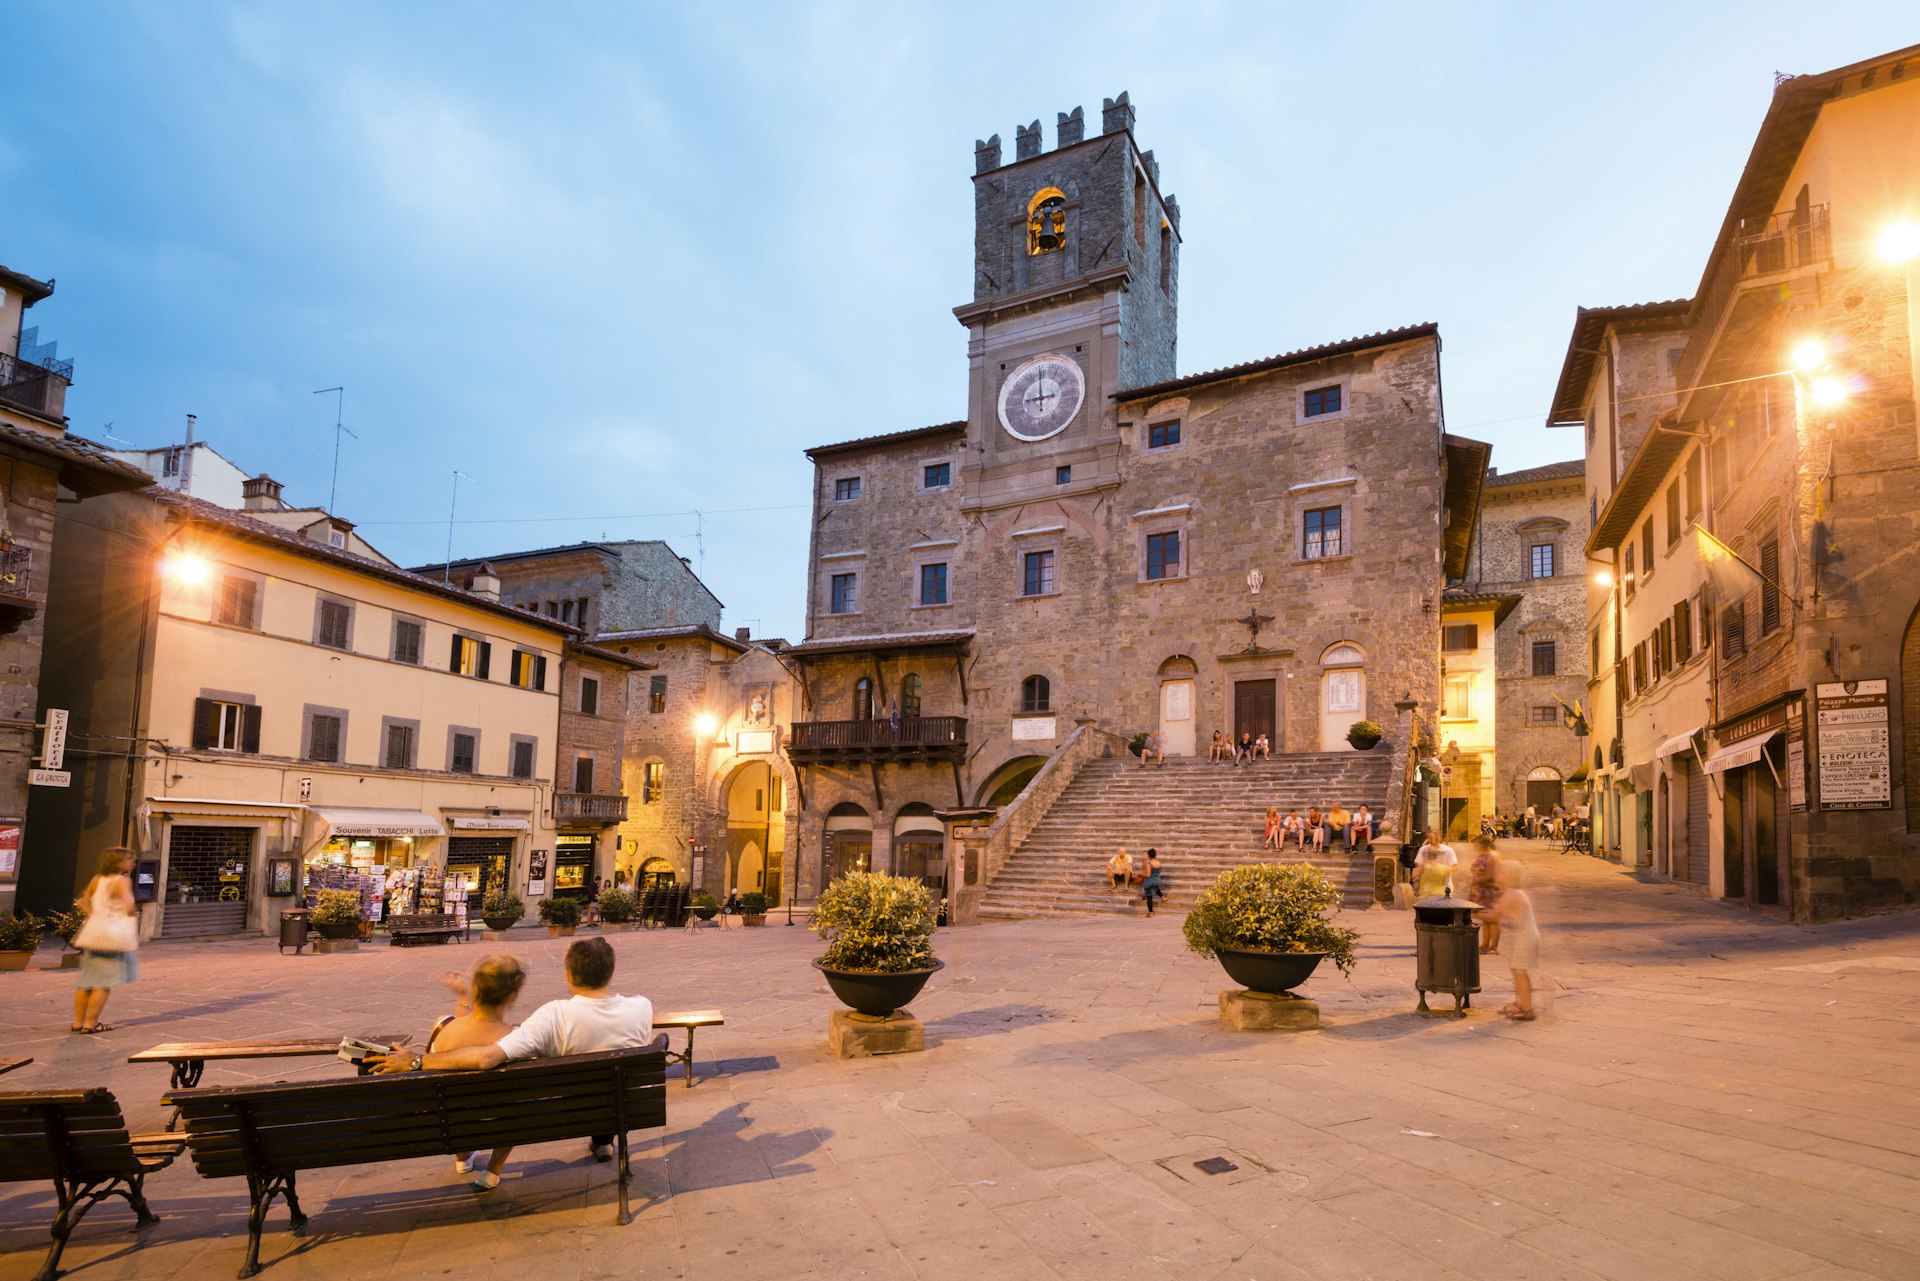 A medieval square at dusk. Two people sit on a bench and admire the surrounding architecture